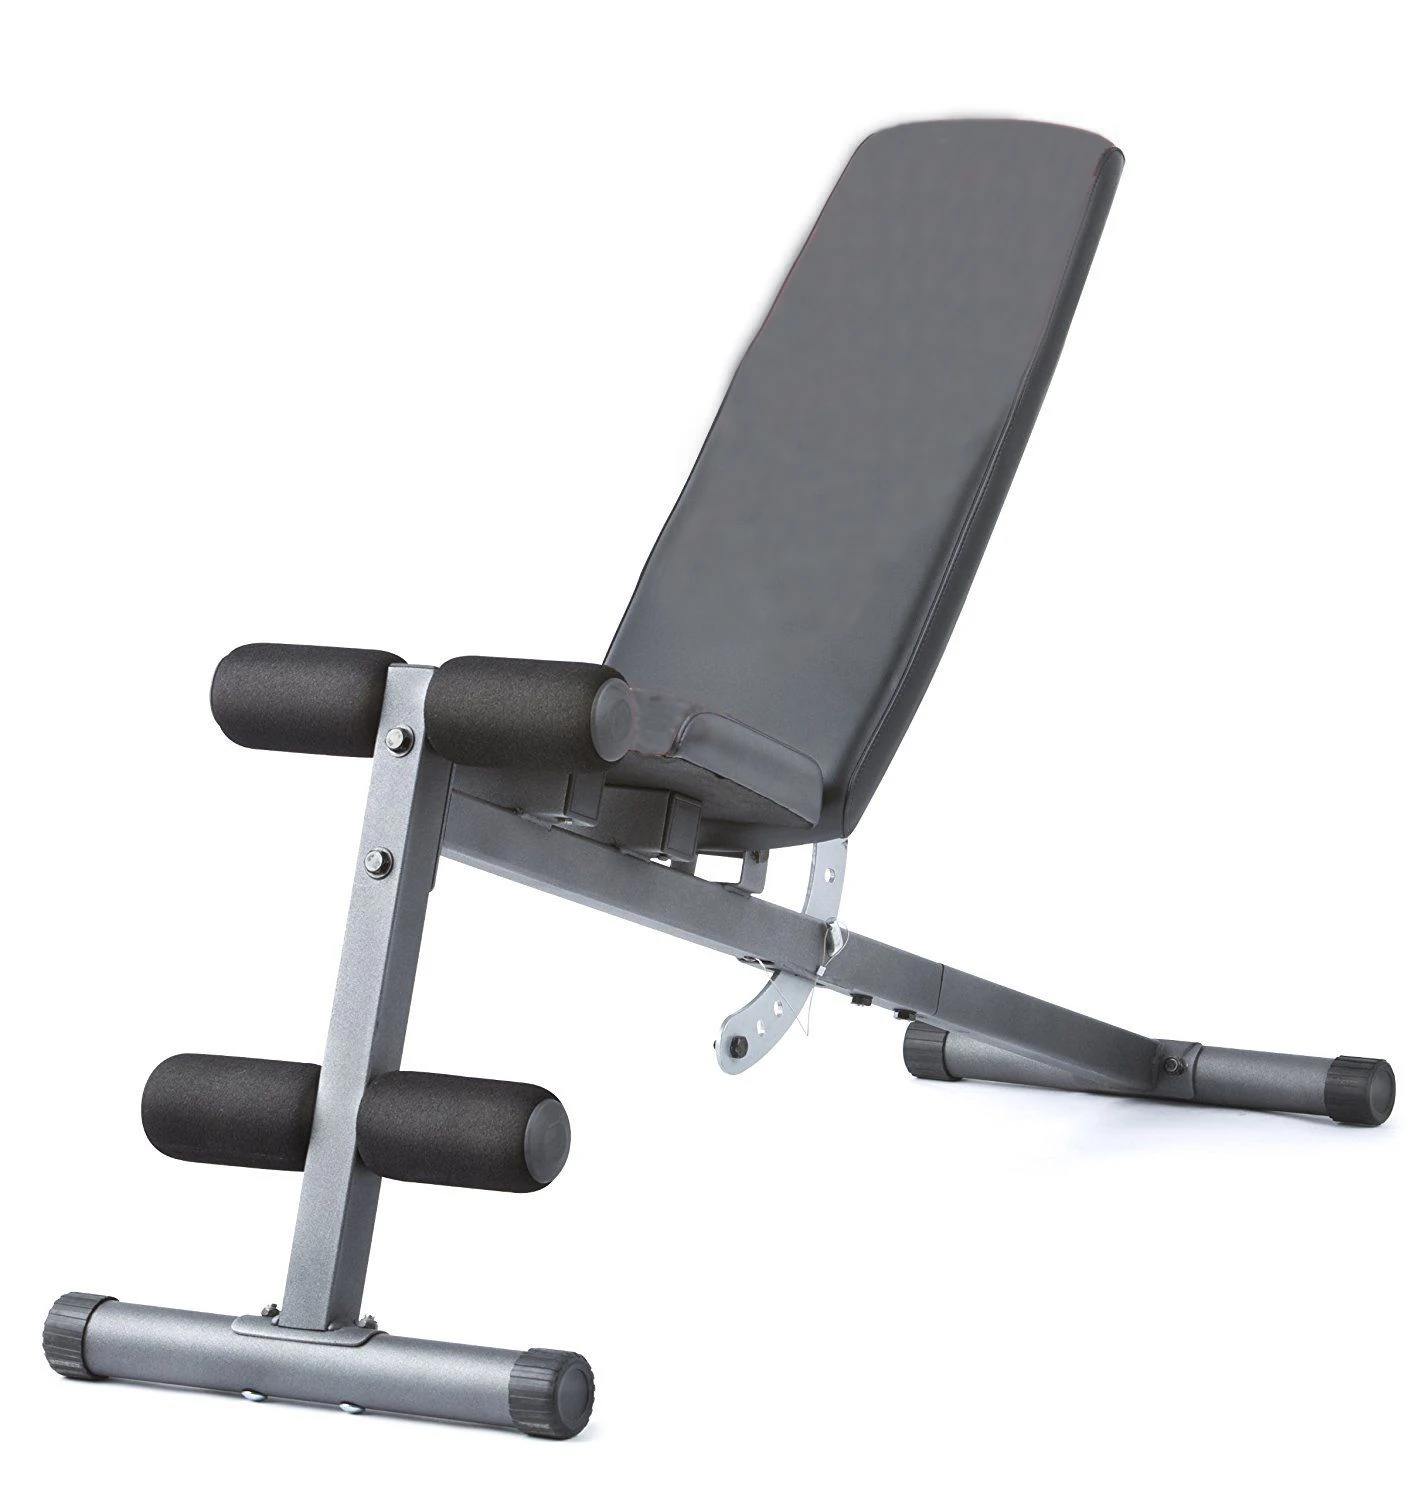 High Quality Pu Leather Portable Exercise Ab Bench Machine Folding Sit Up Bench Buy Sit Up Bench For Sale